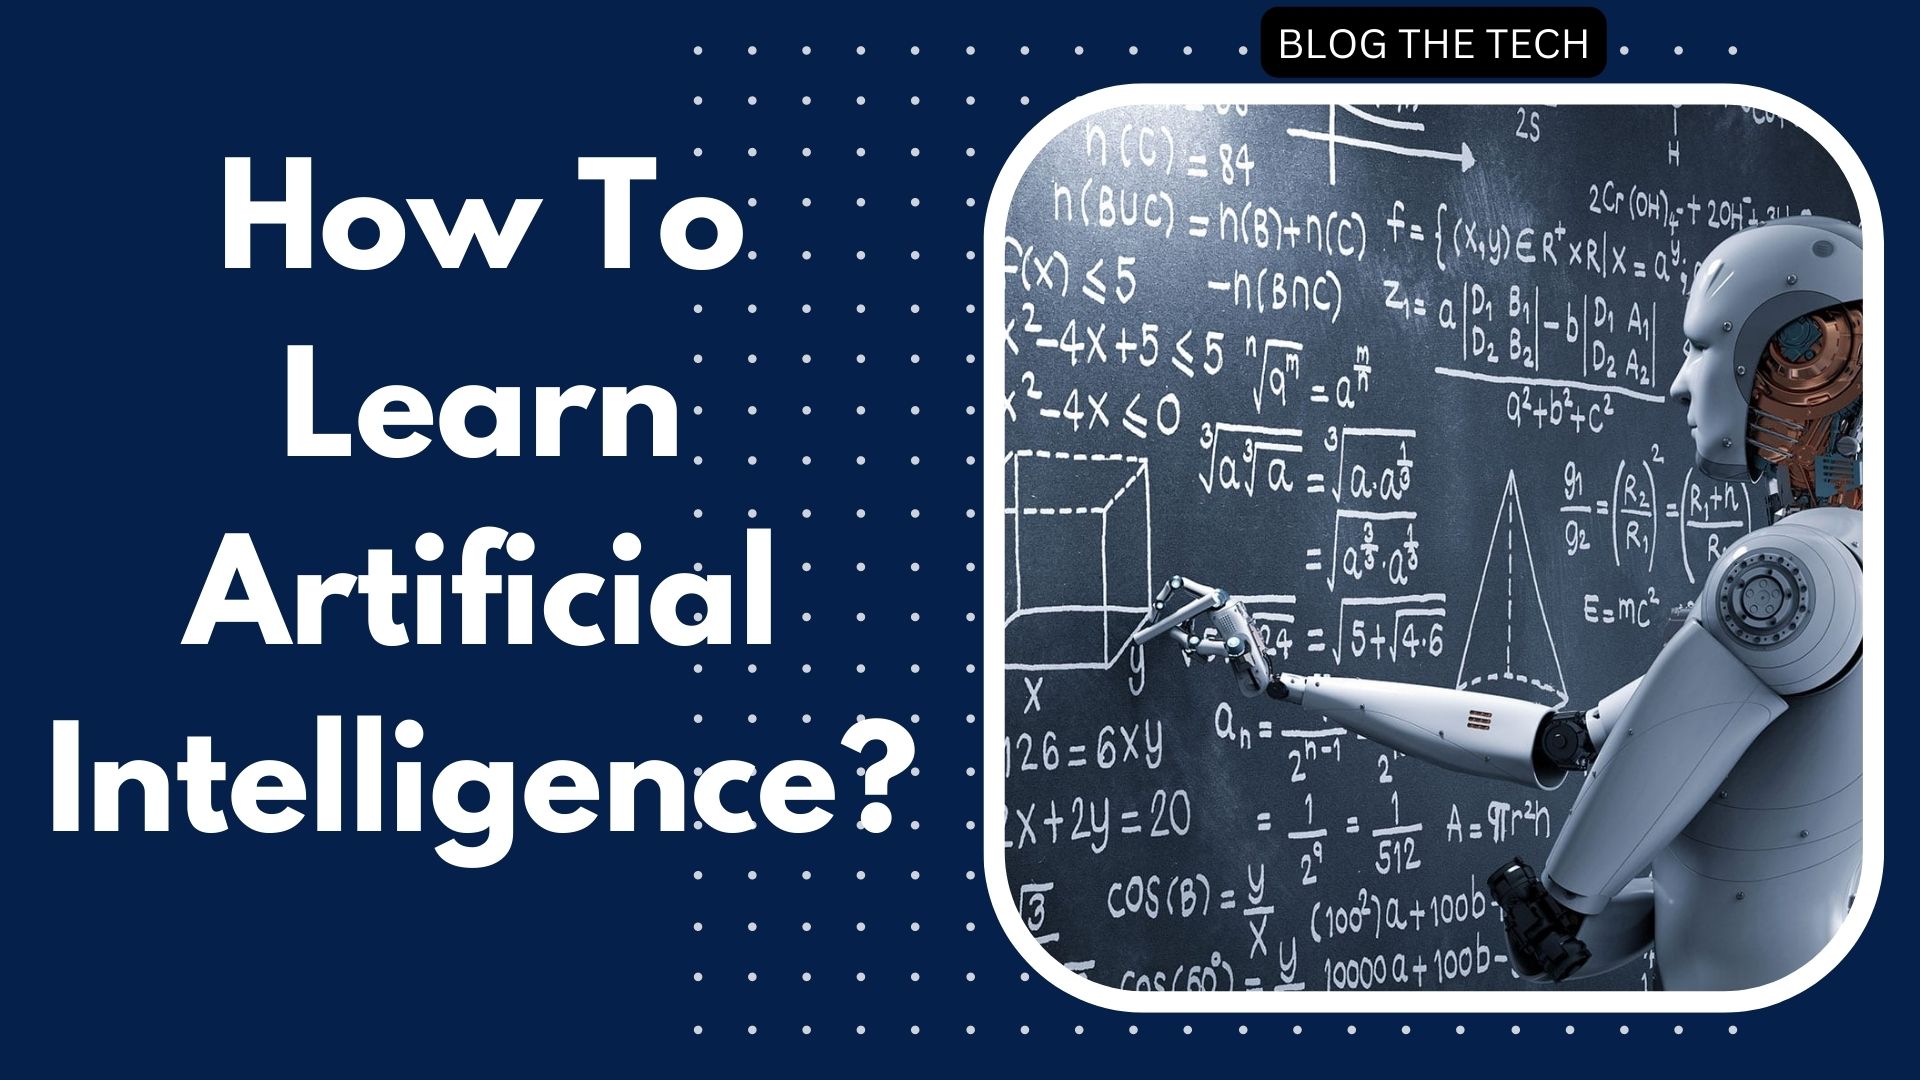 How To Learn Artificial Intelligence?